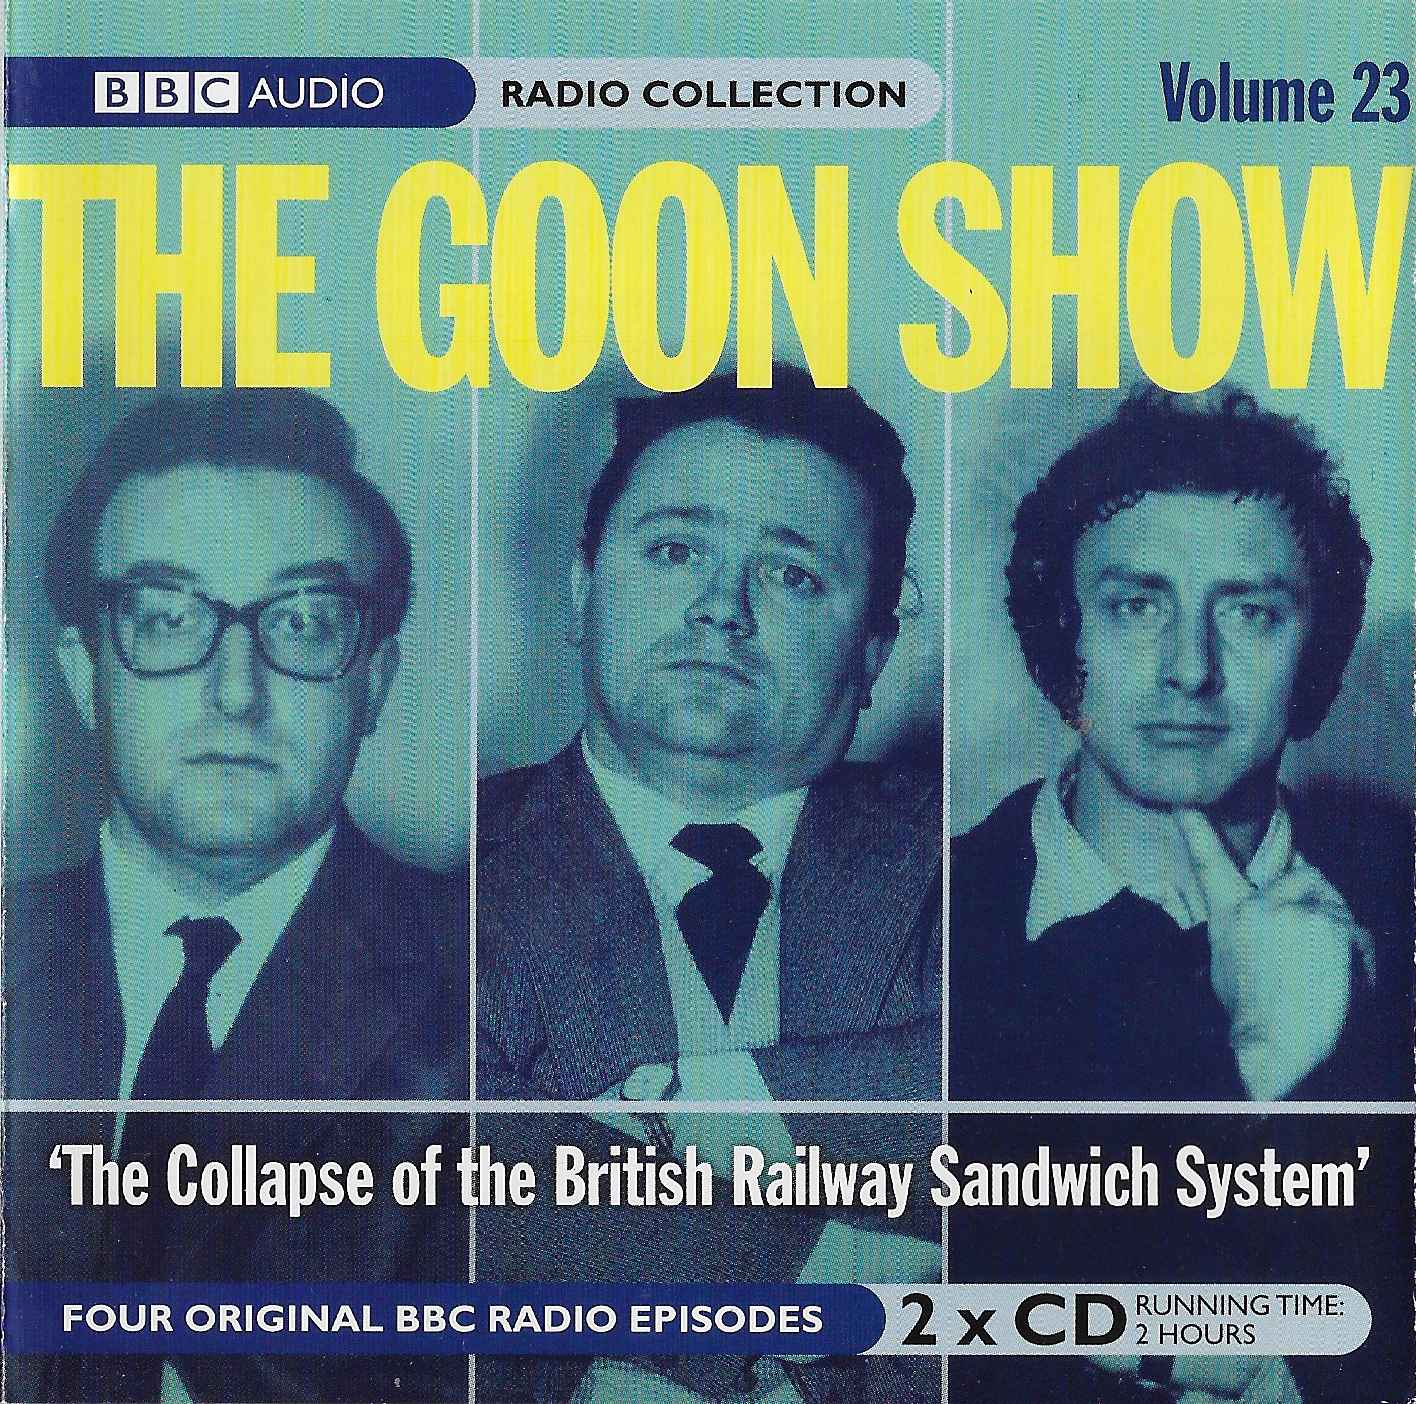 Picture of ISBN 0-563-52797-8 The Goon show 23 - The collapse of the British Railway sandwich system by artist Spike Milligan from the BBC cds - Records and Tapes library